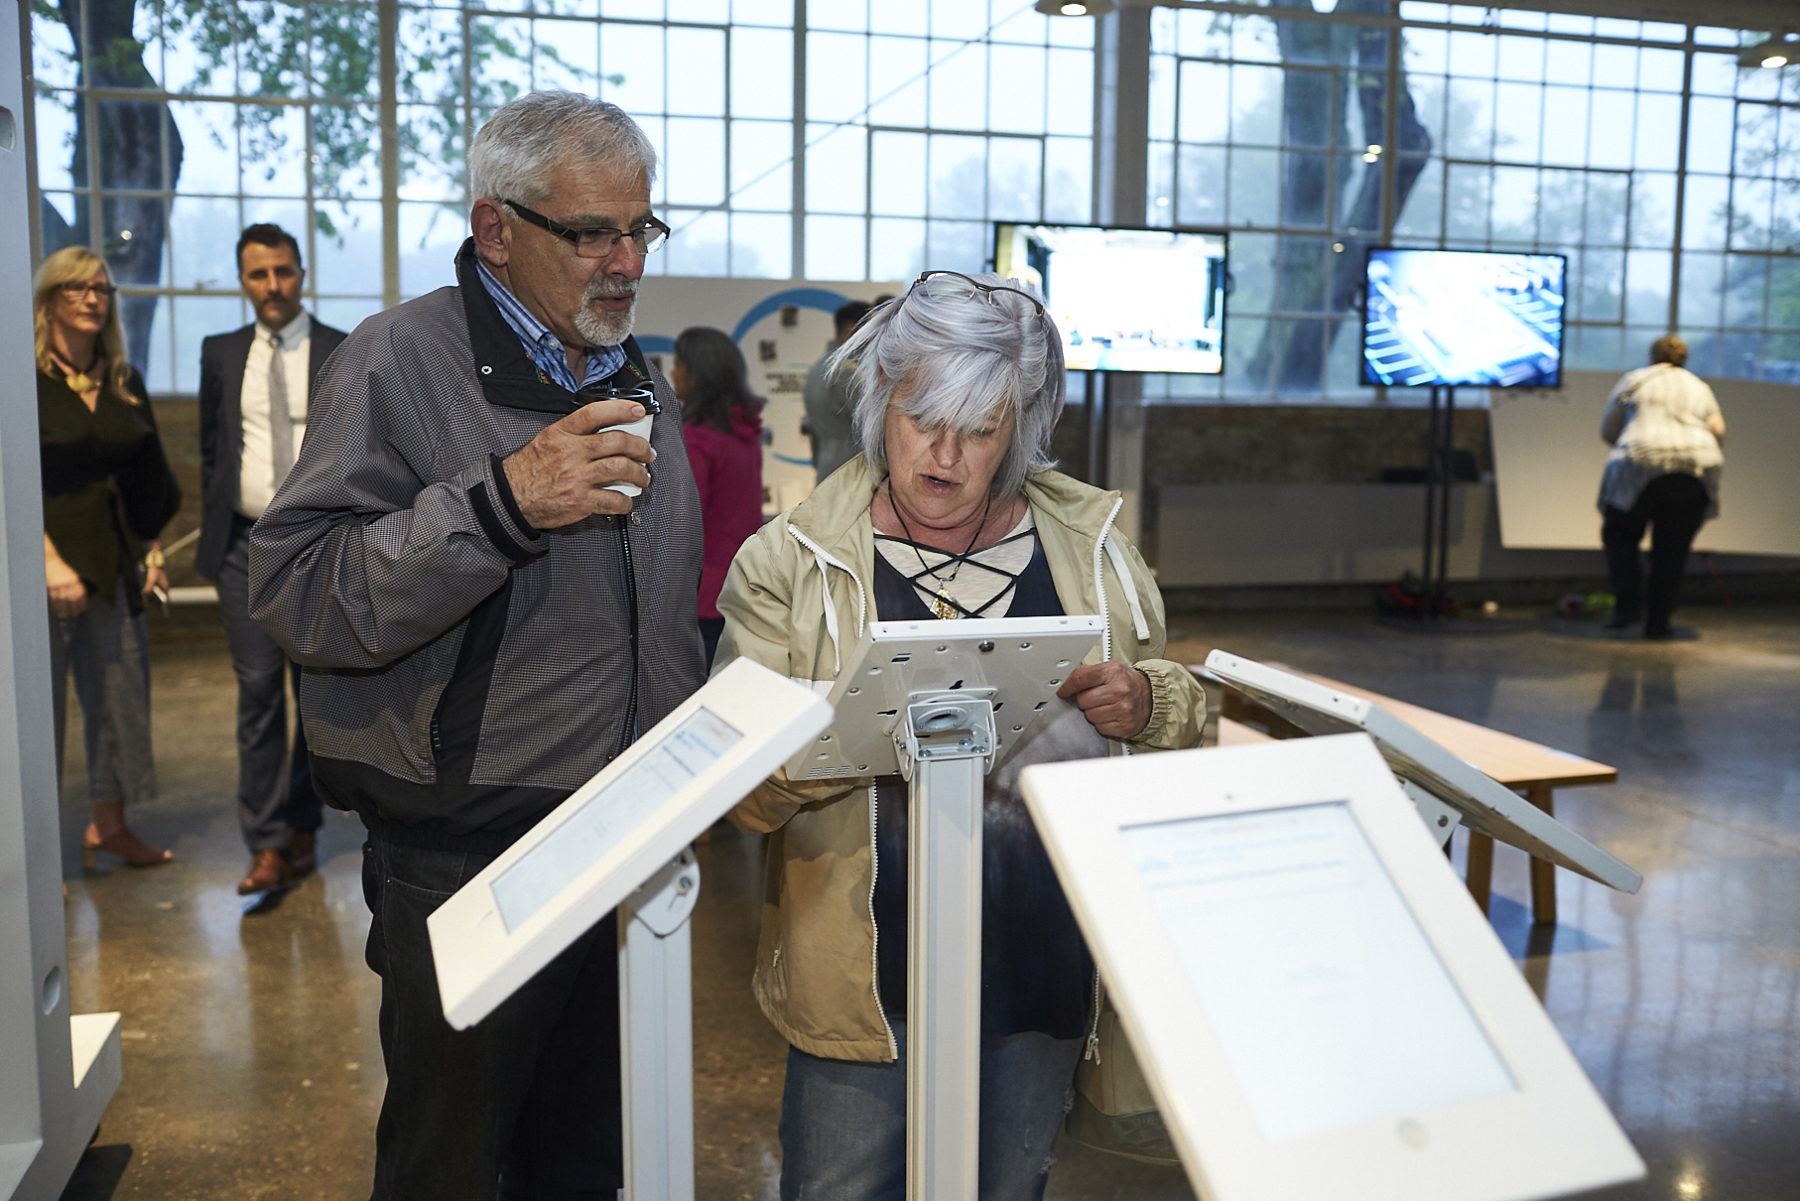 Older couple looks at placard with information about the plan